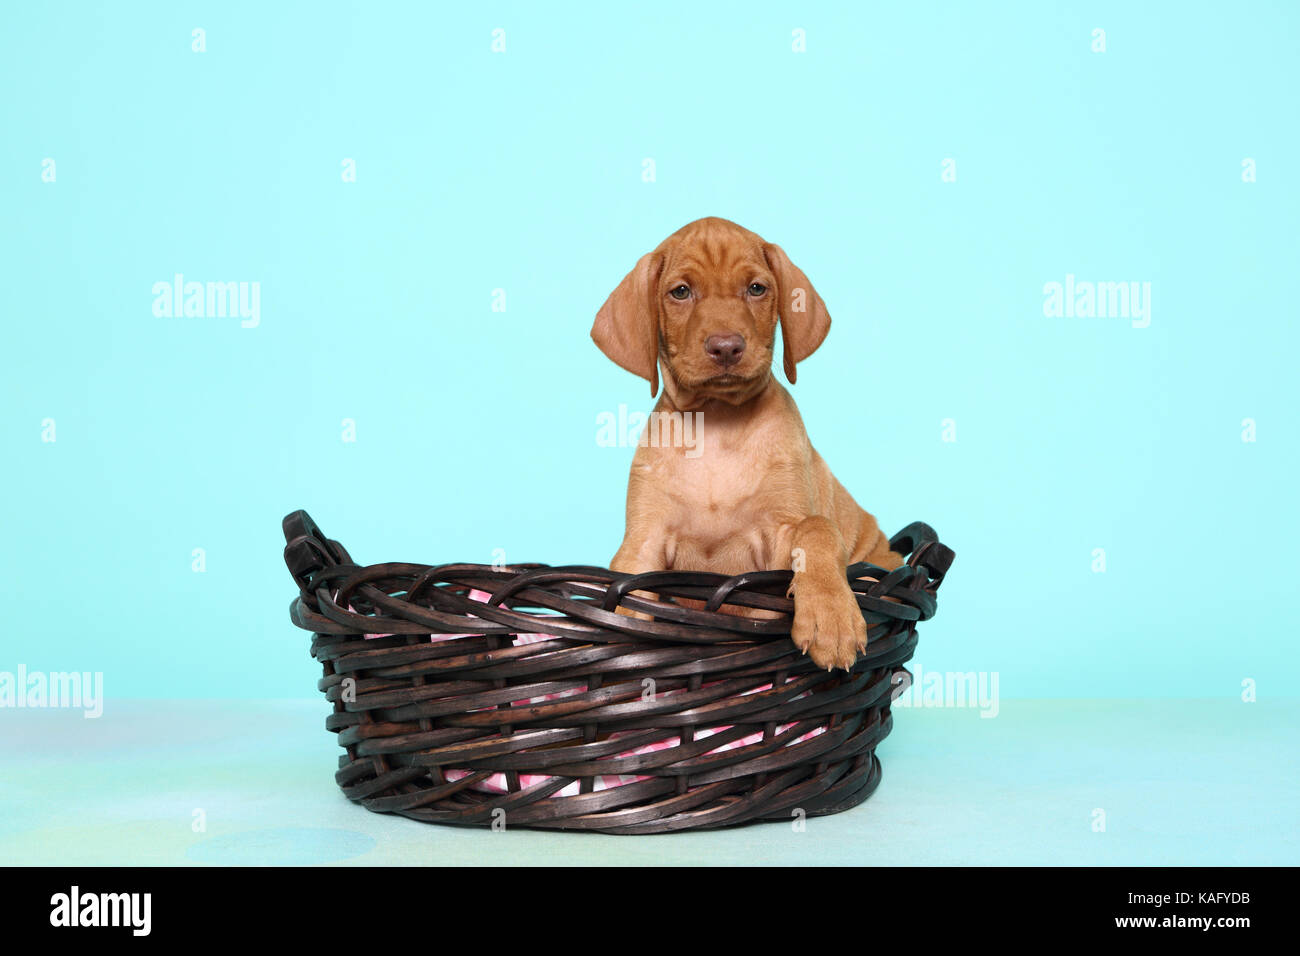 Vizsla. Puppy (6 weeks old) sitting in a basket. Studio picture, seen against a light blue background. Germany Stock Photo